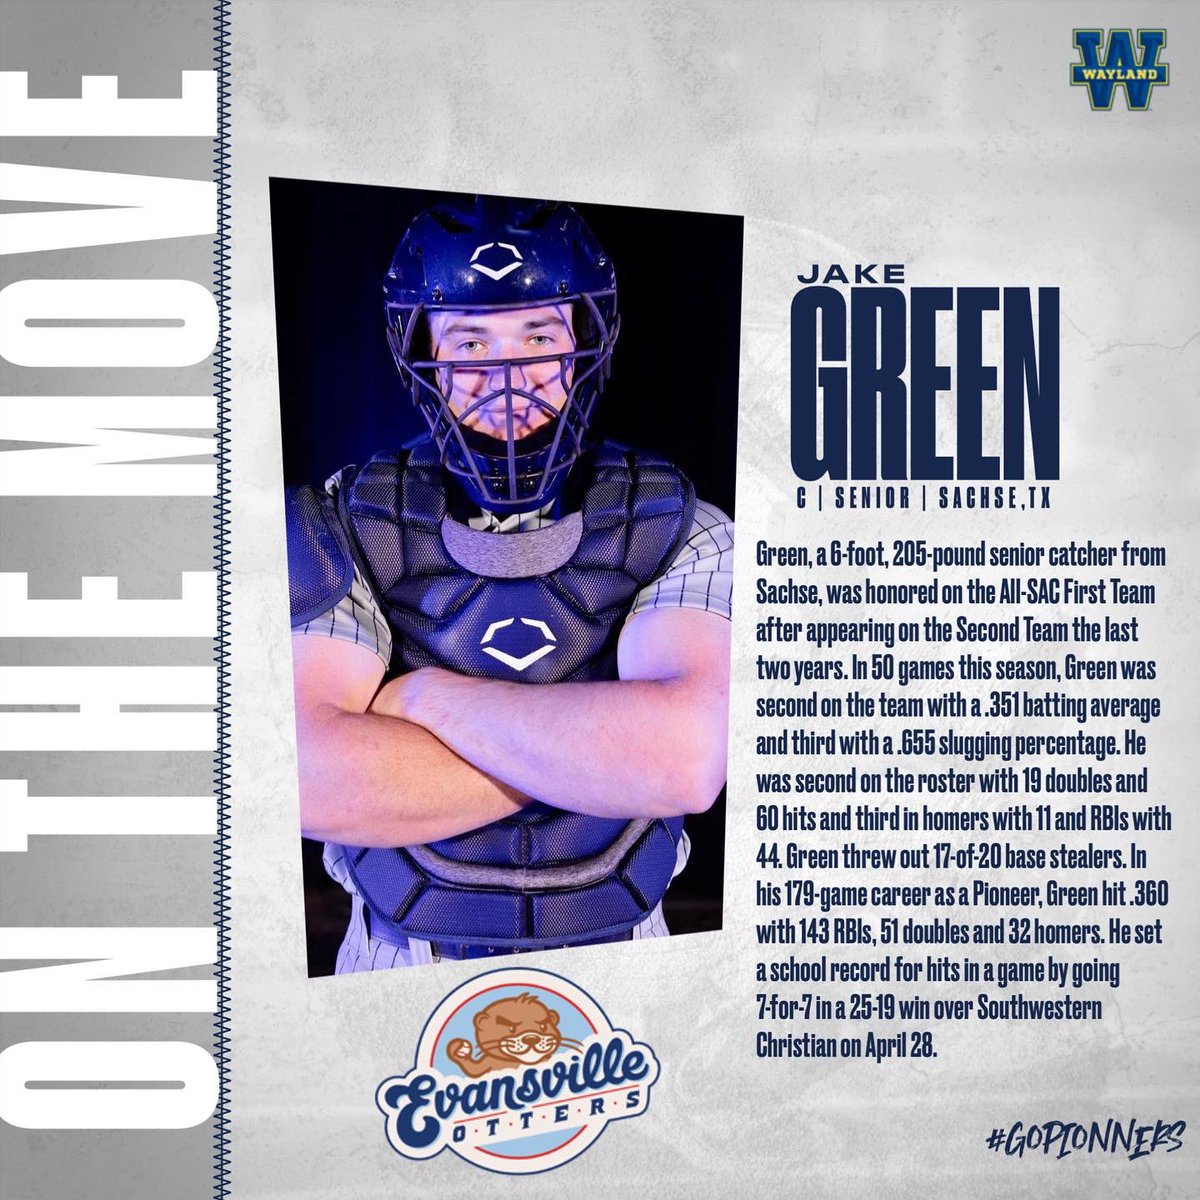 SIGNED! ✍️
Jake Green (@JakeGr15) has agreed to sign with the Evansville Otters of the Frontier League. @FLProBaseball 

#wbubaseball | #gopioneers | #tmac4ever